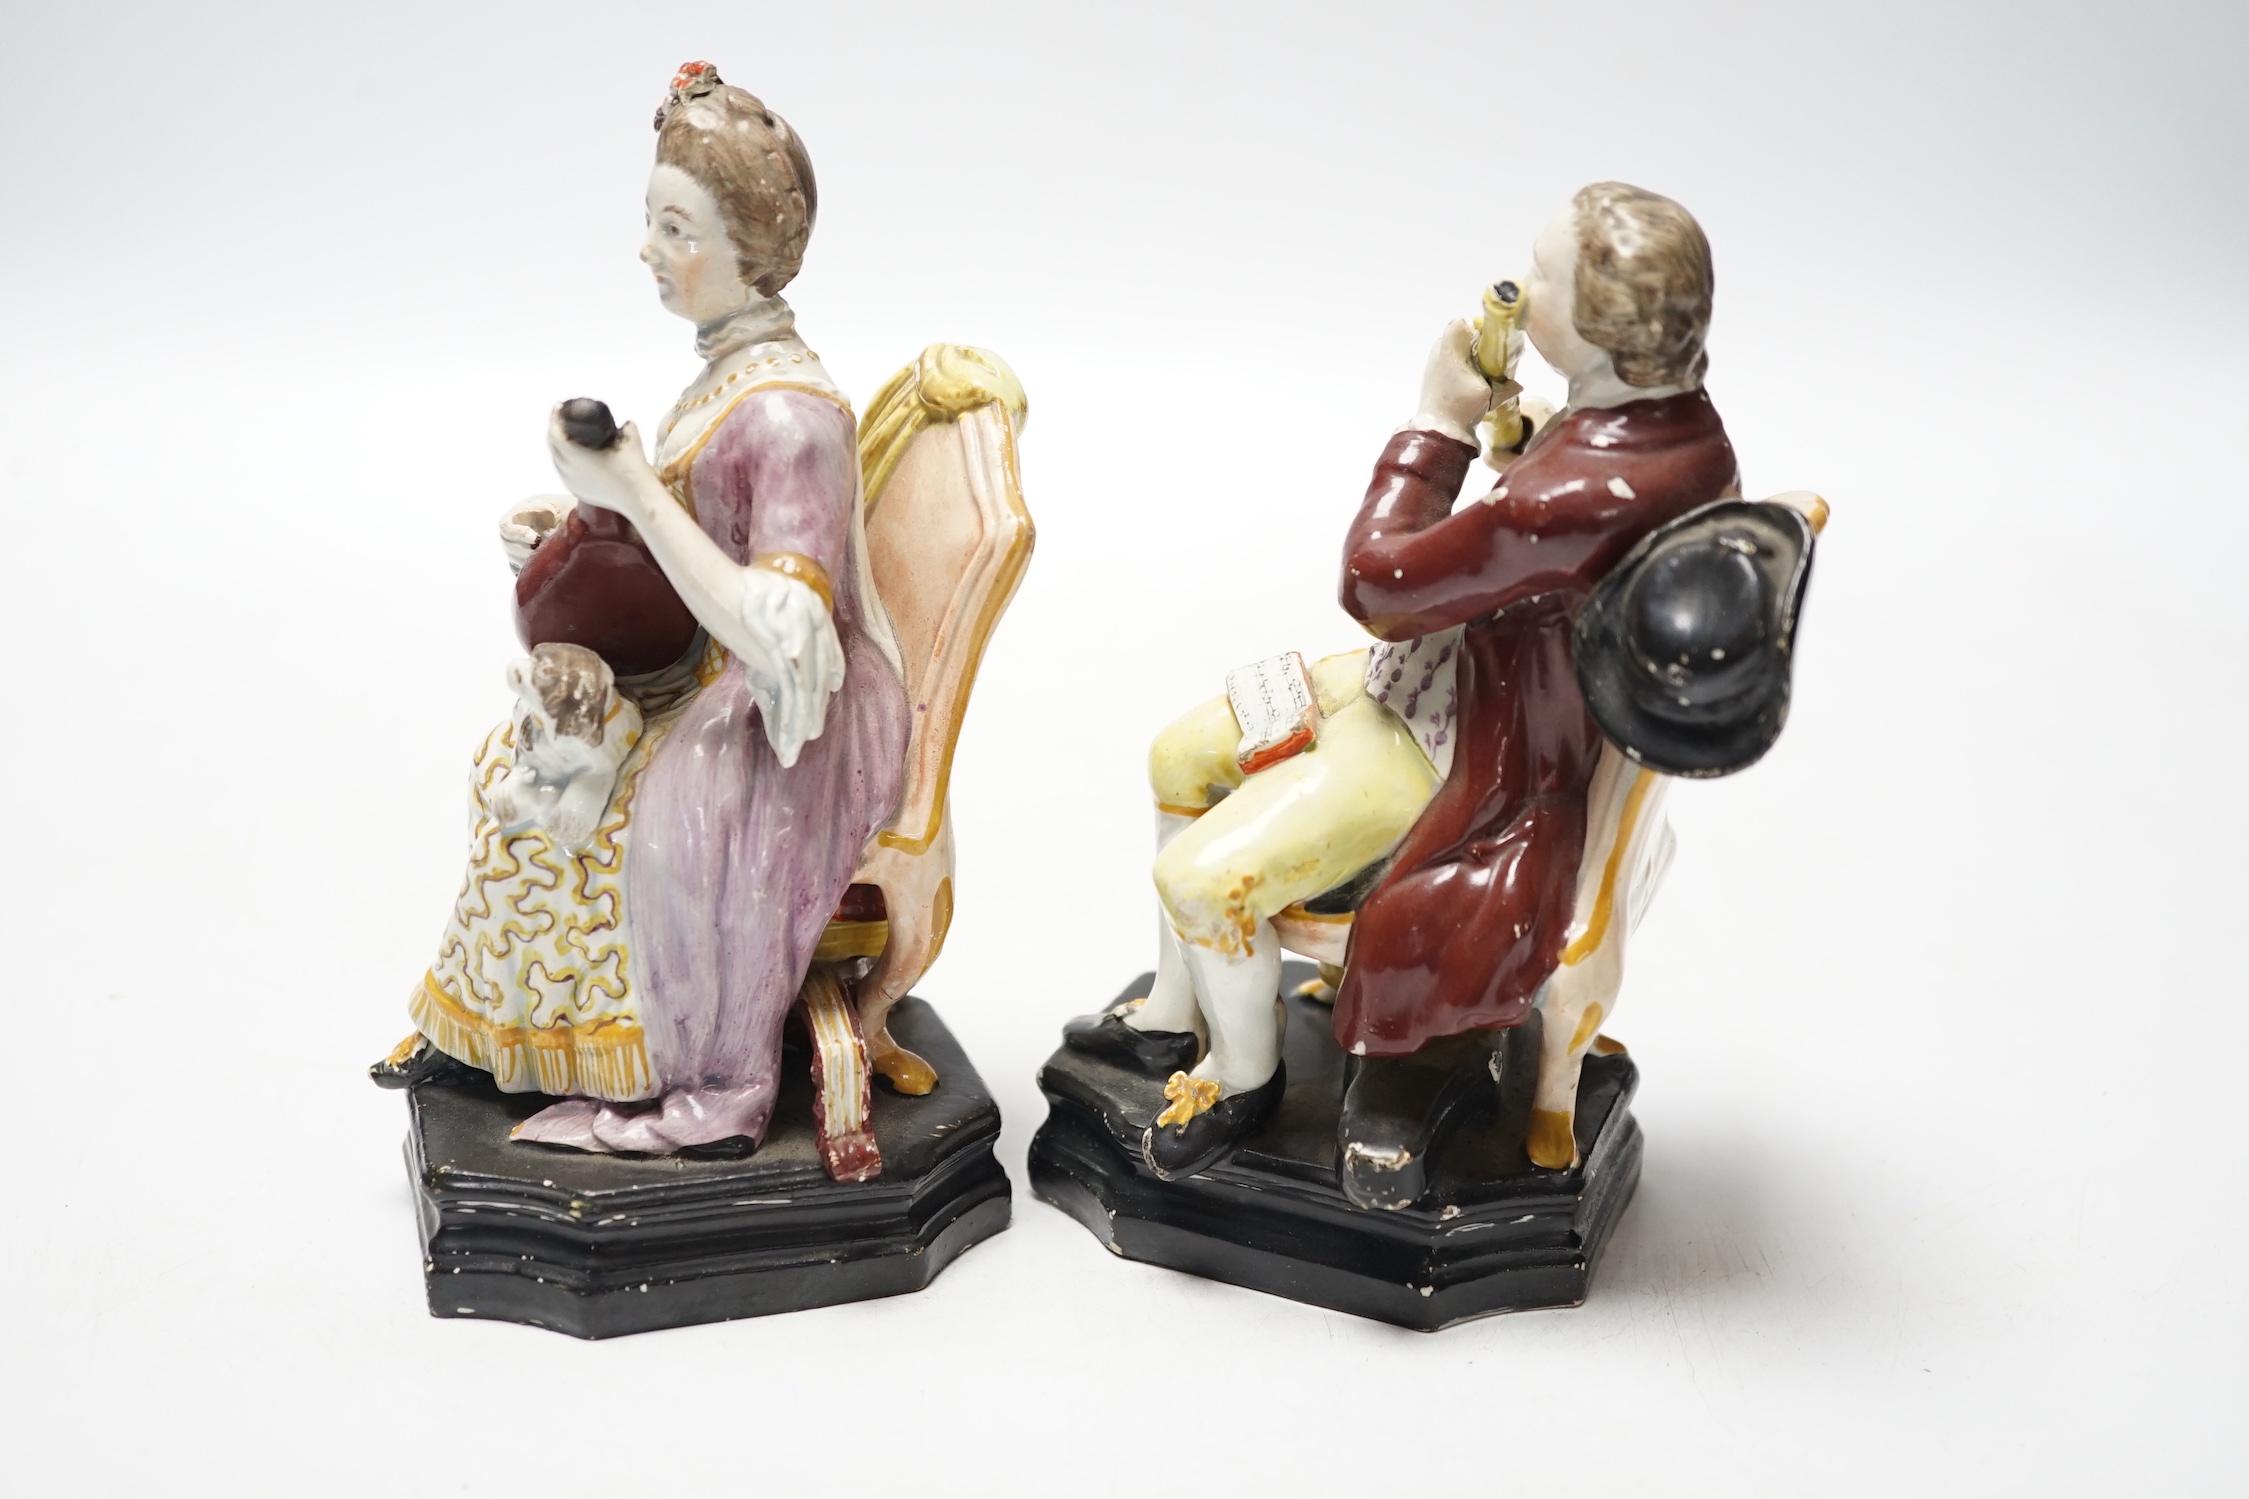 A pair of Staffordshire pearlware figures of musicians seated on chairs, c.1825, 14cm